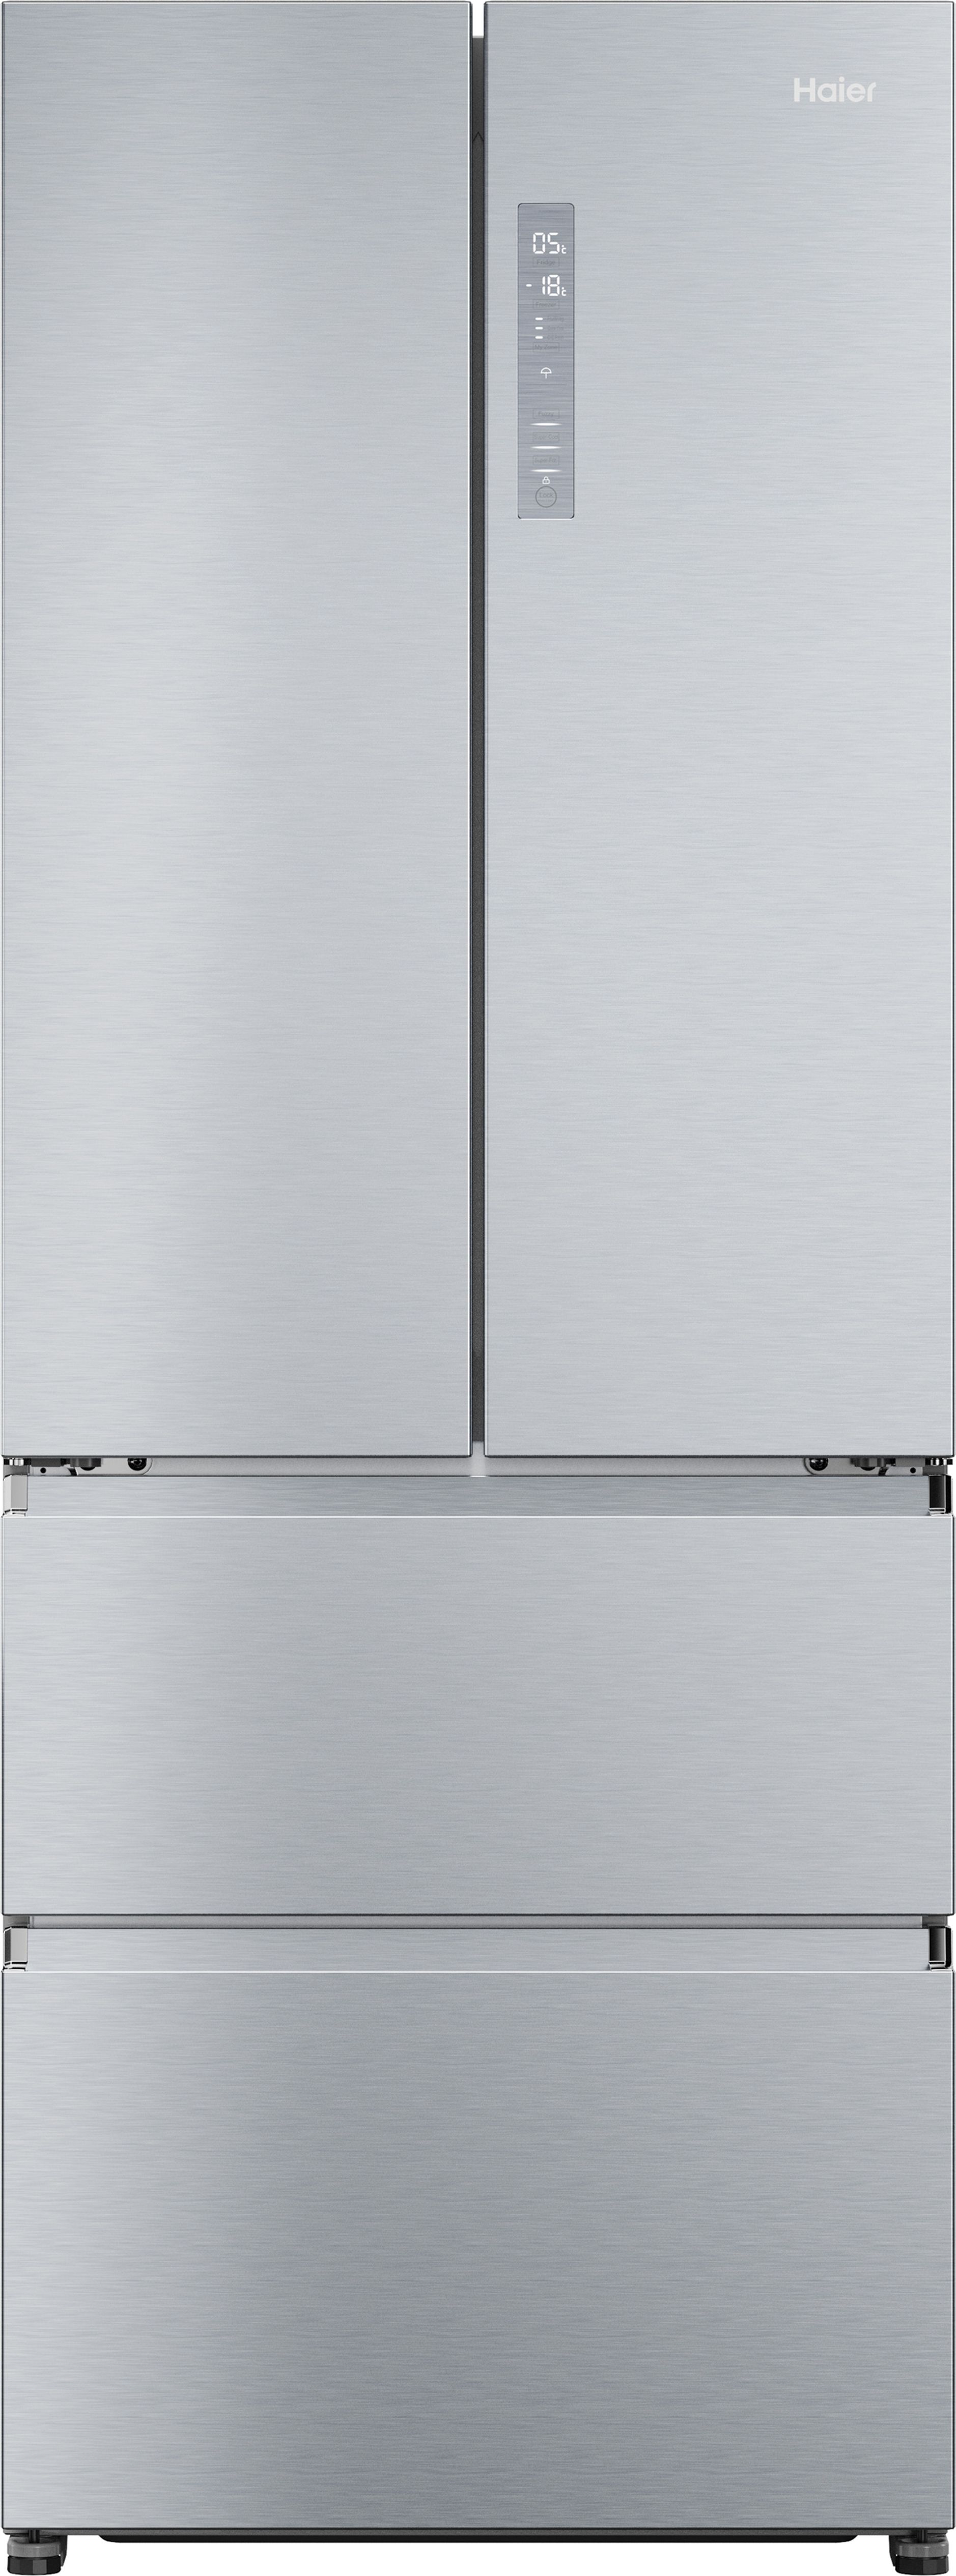 Haier FD 70 Series 5 HFR5719ENMG Frost Free American Fridge Freezer - Stainless Steel - E Rated, Stainless Steel